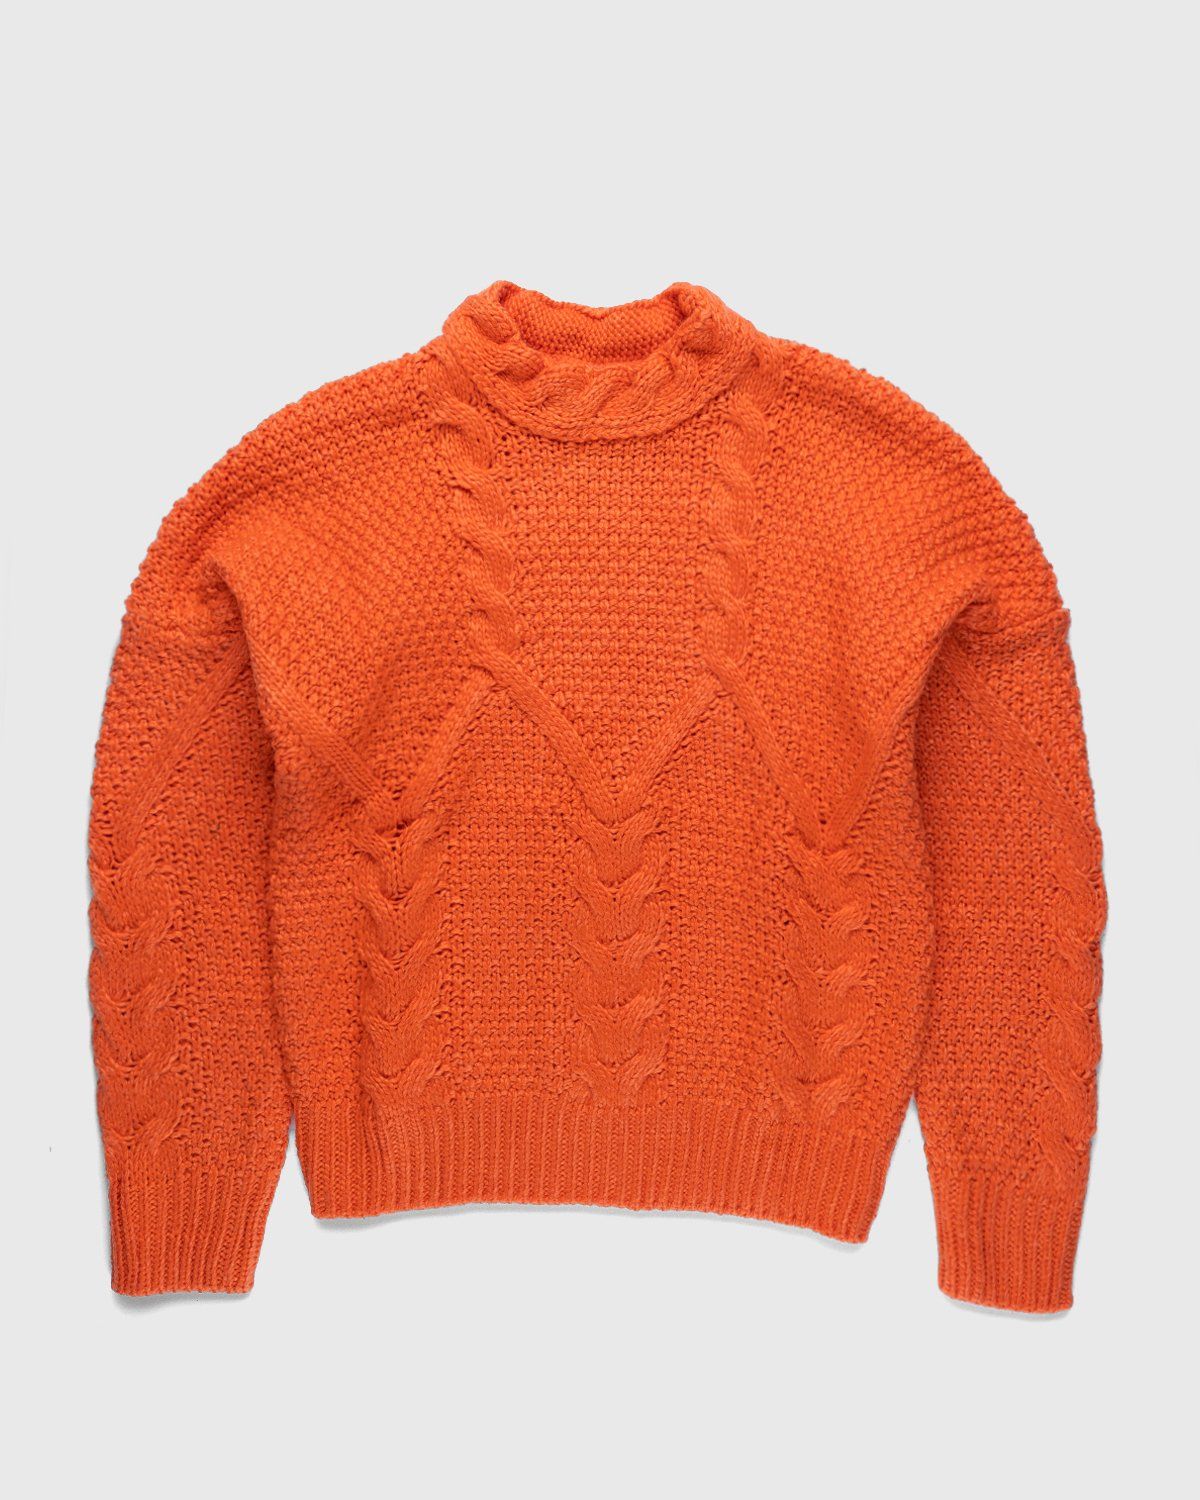 Winnie New York – Intwined Cable Knit Sweater Red - Image 1